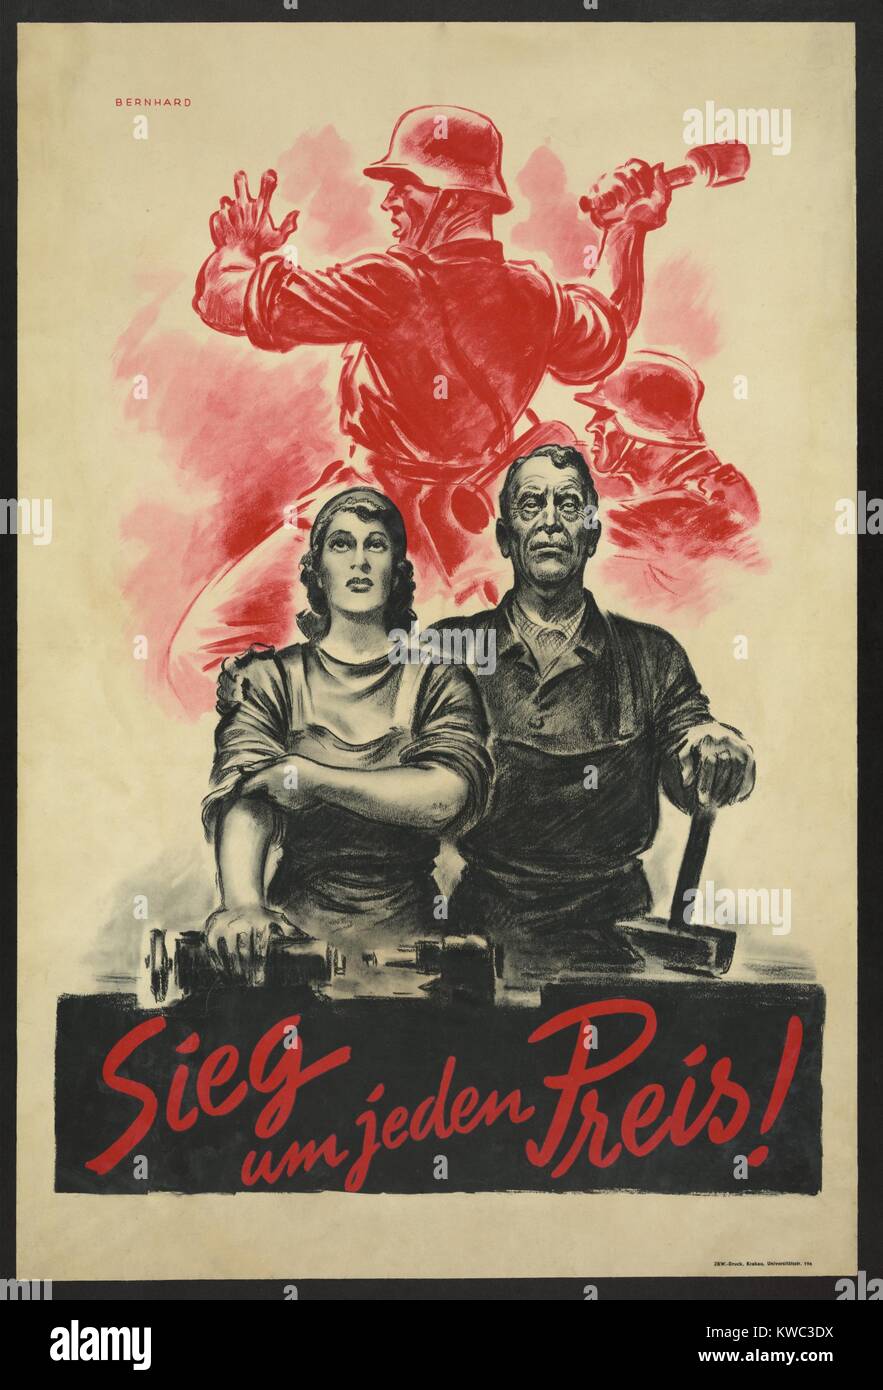 Sieg um jeden Preis! Victory at any cost! 1942 German World War 2 poster showing two civilian laborers against a background of soldier throwing grenade. Germany transitioned to a 'Total War' economy in 1942-43. (BSLOC 2015 13 62) Stock Photo